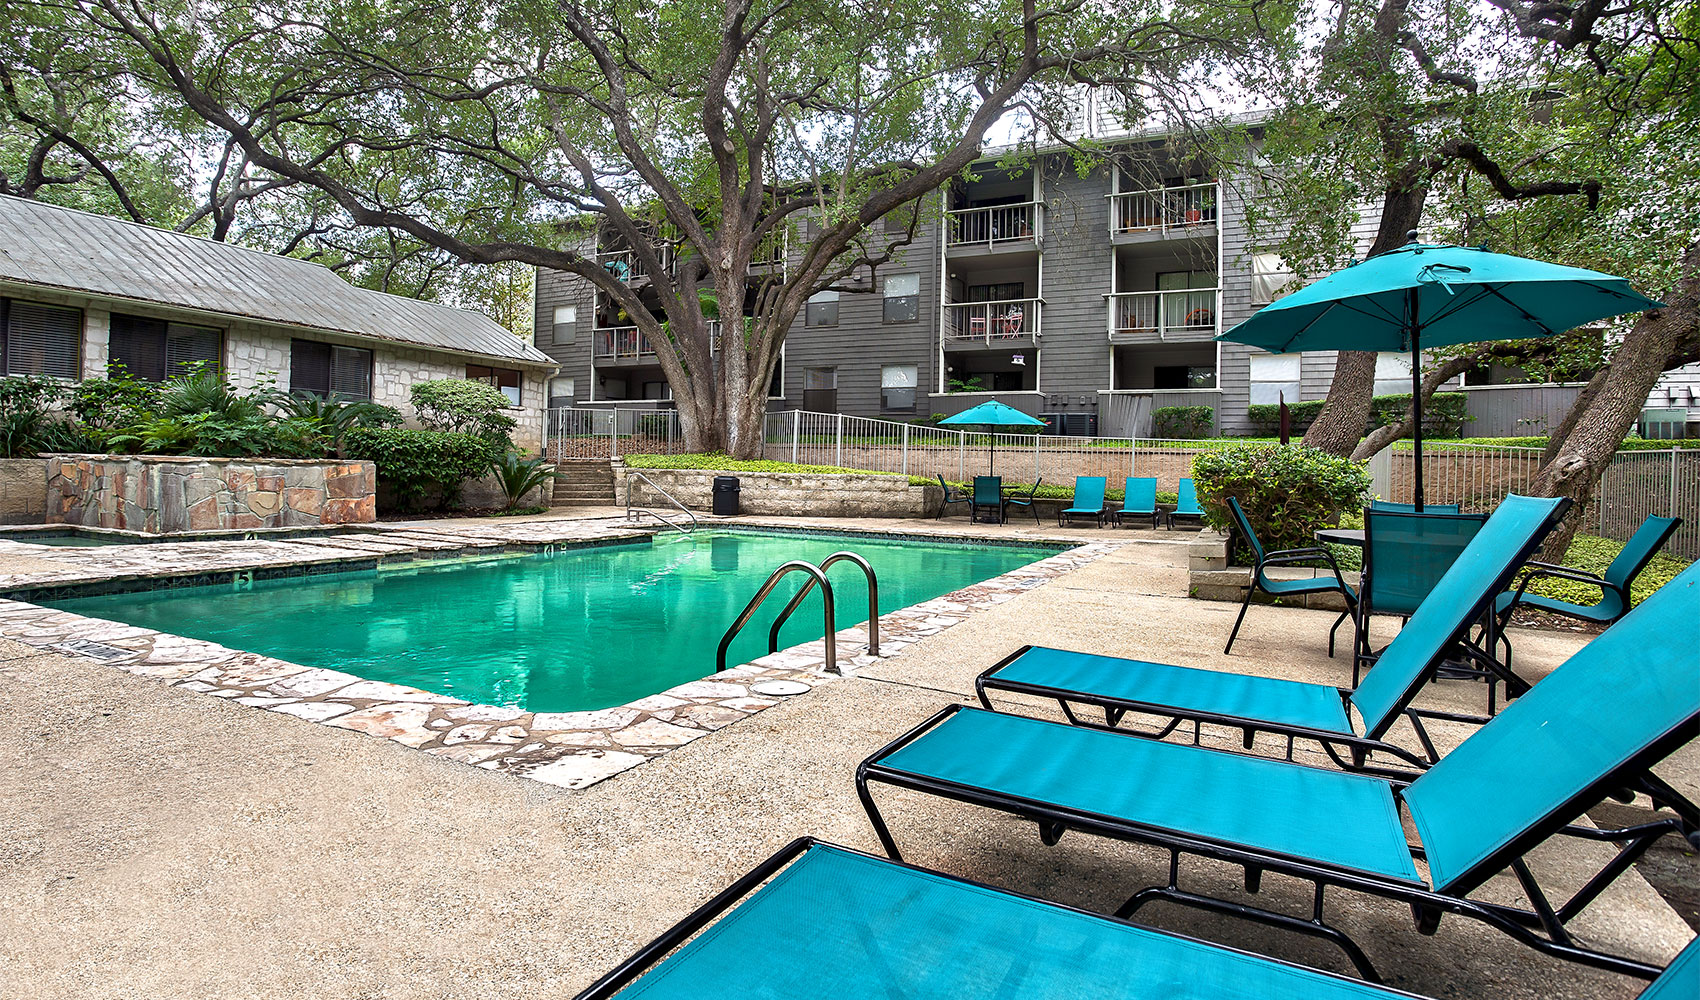 1 & 2 Bedroom Apartments for Rent with Pool at Songbird Apartments in North Central San Antonio, TX.